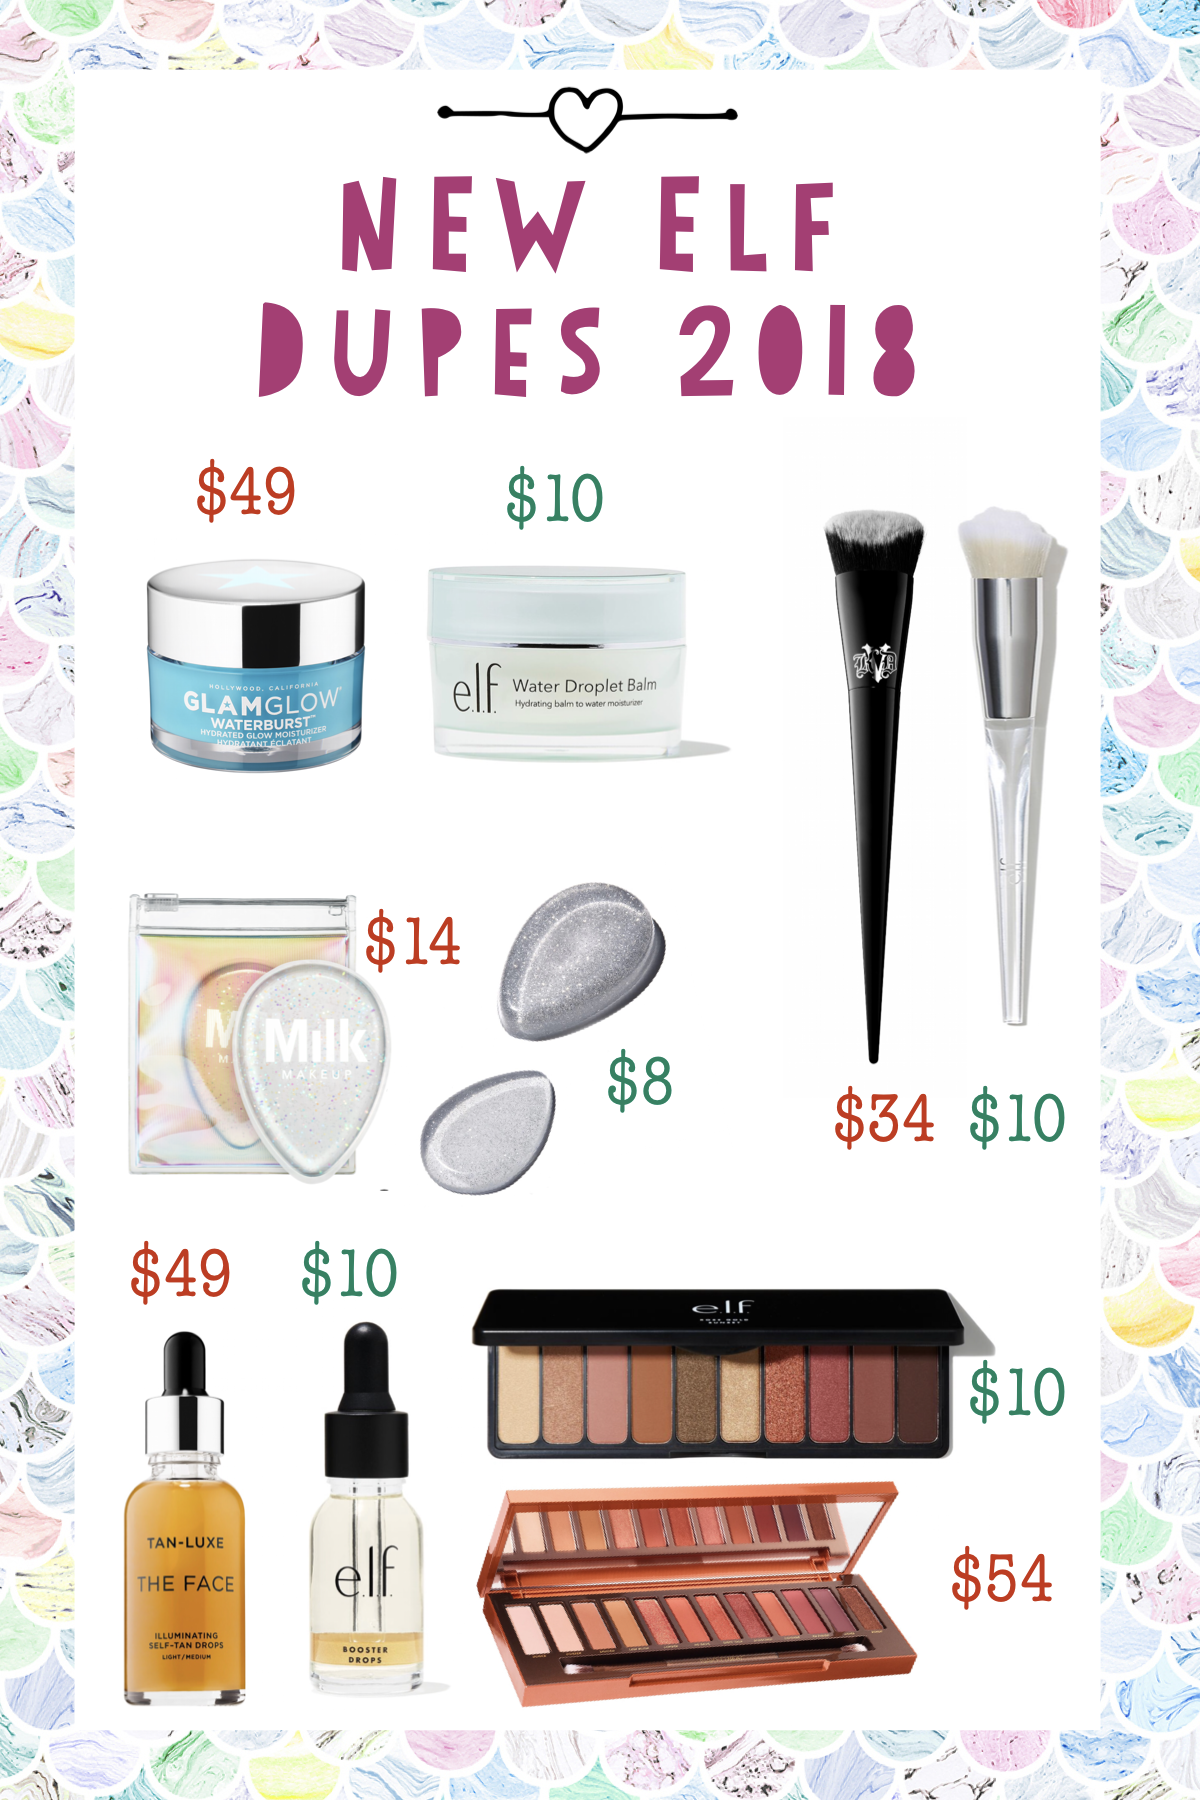 Elf Dupes 2018 – NEW Part 7 – Dupes for Urban Decay Naked Heat Palette, Milk, GlamGlow, Kat Von D and more!